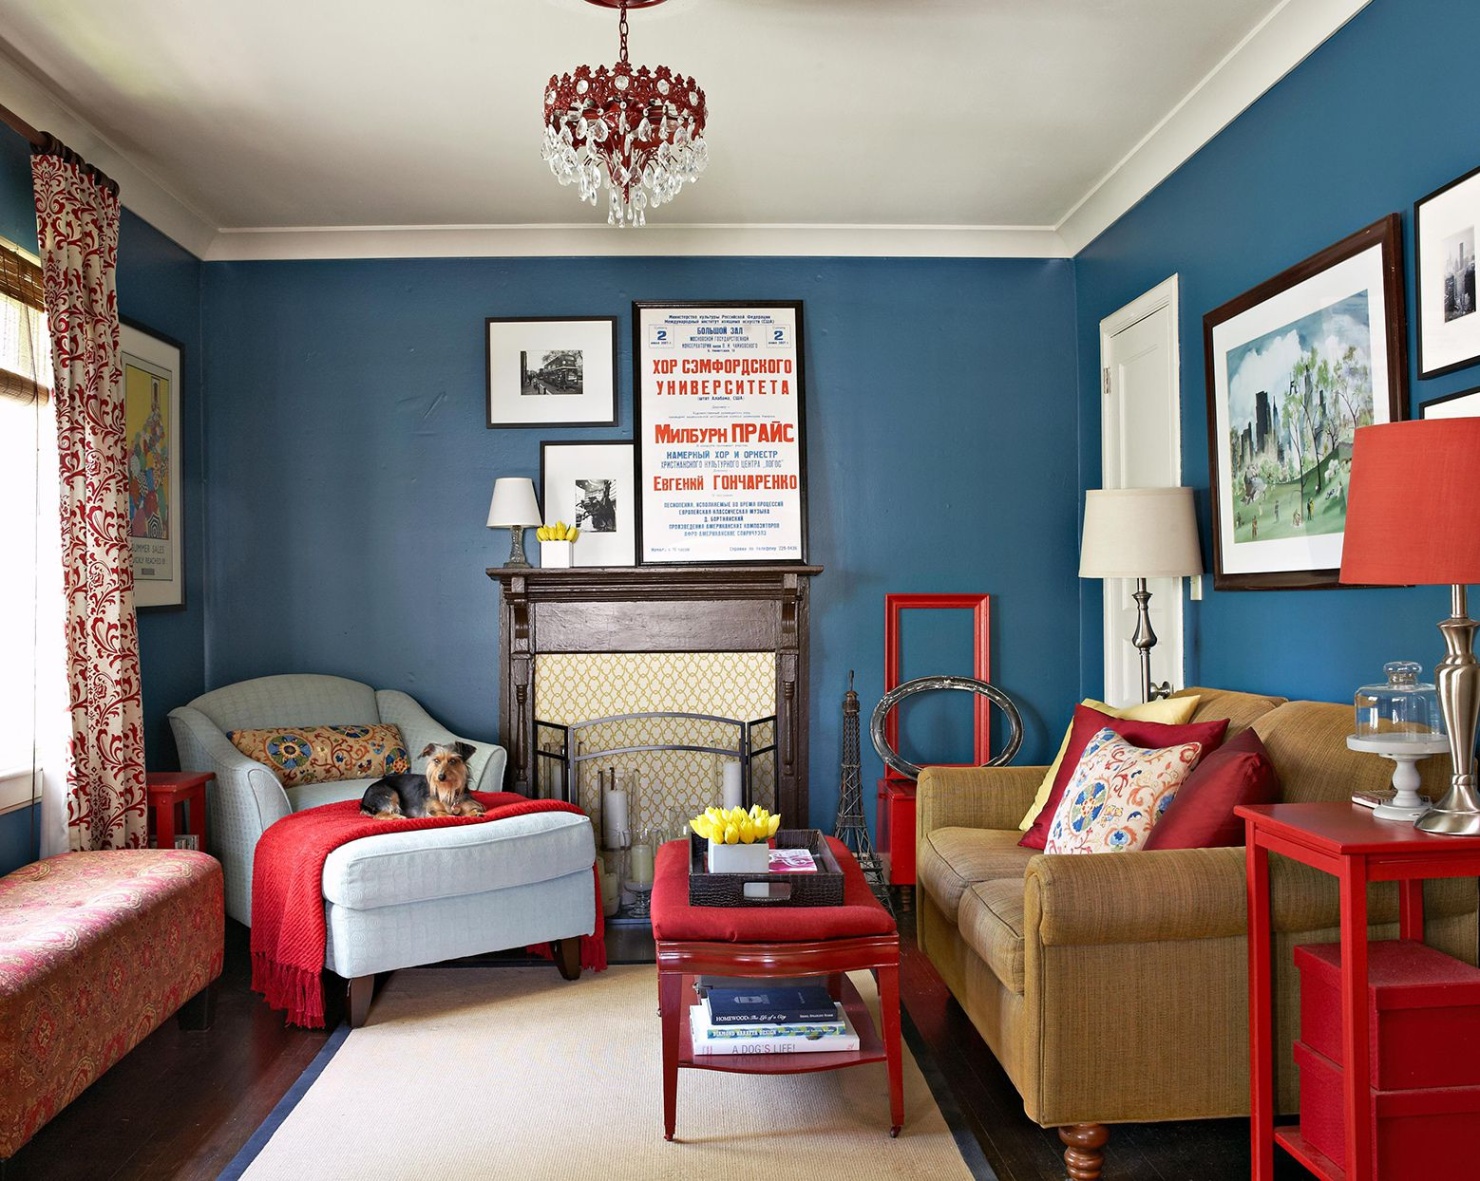 10 Stunning Decor Ideas For Rooms With Blue Walls That Will Blow Your Mind!